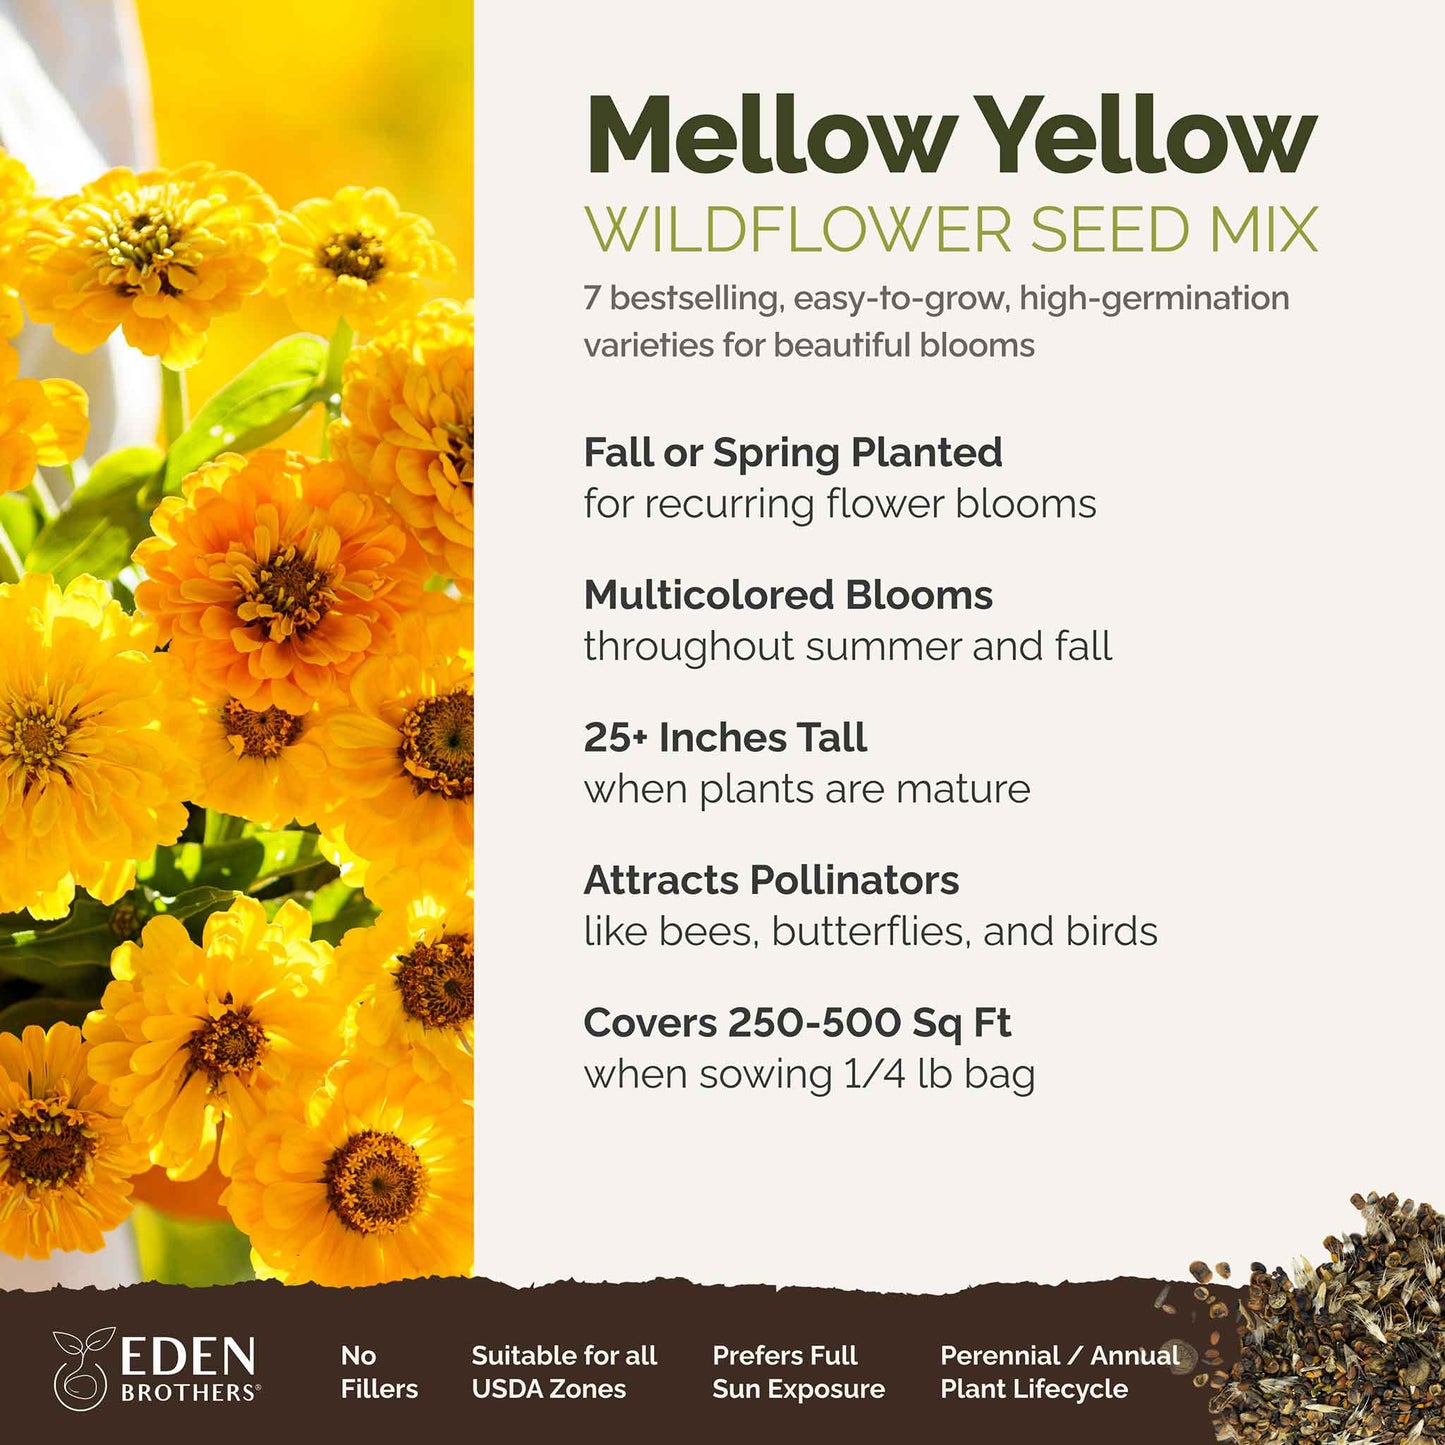 mellow yellow overview